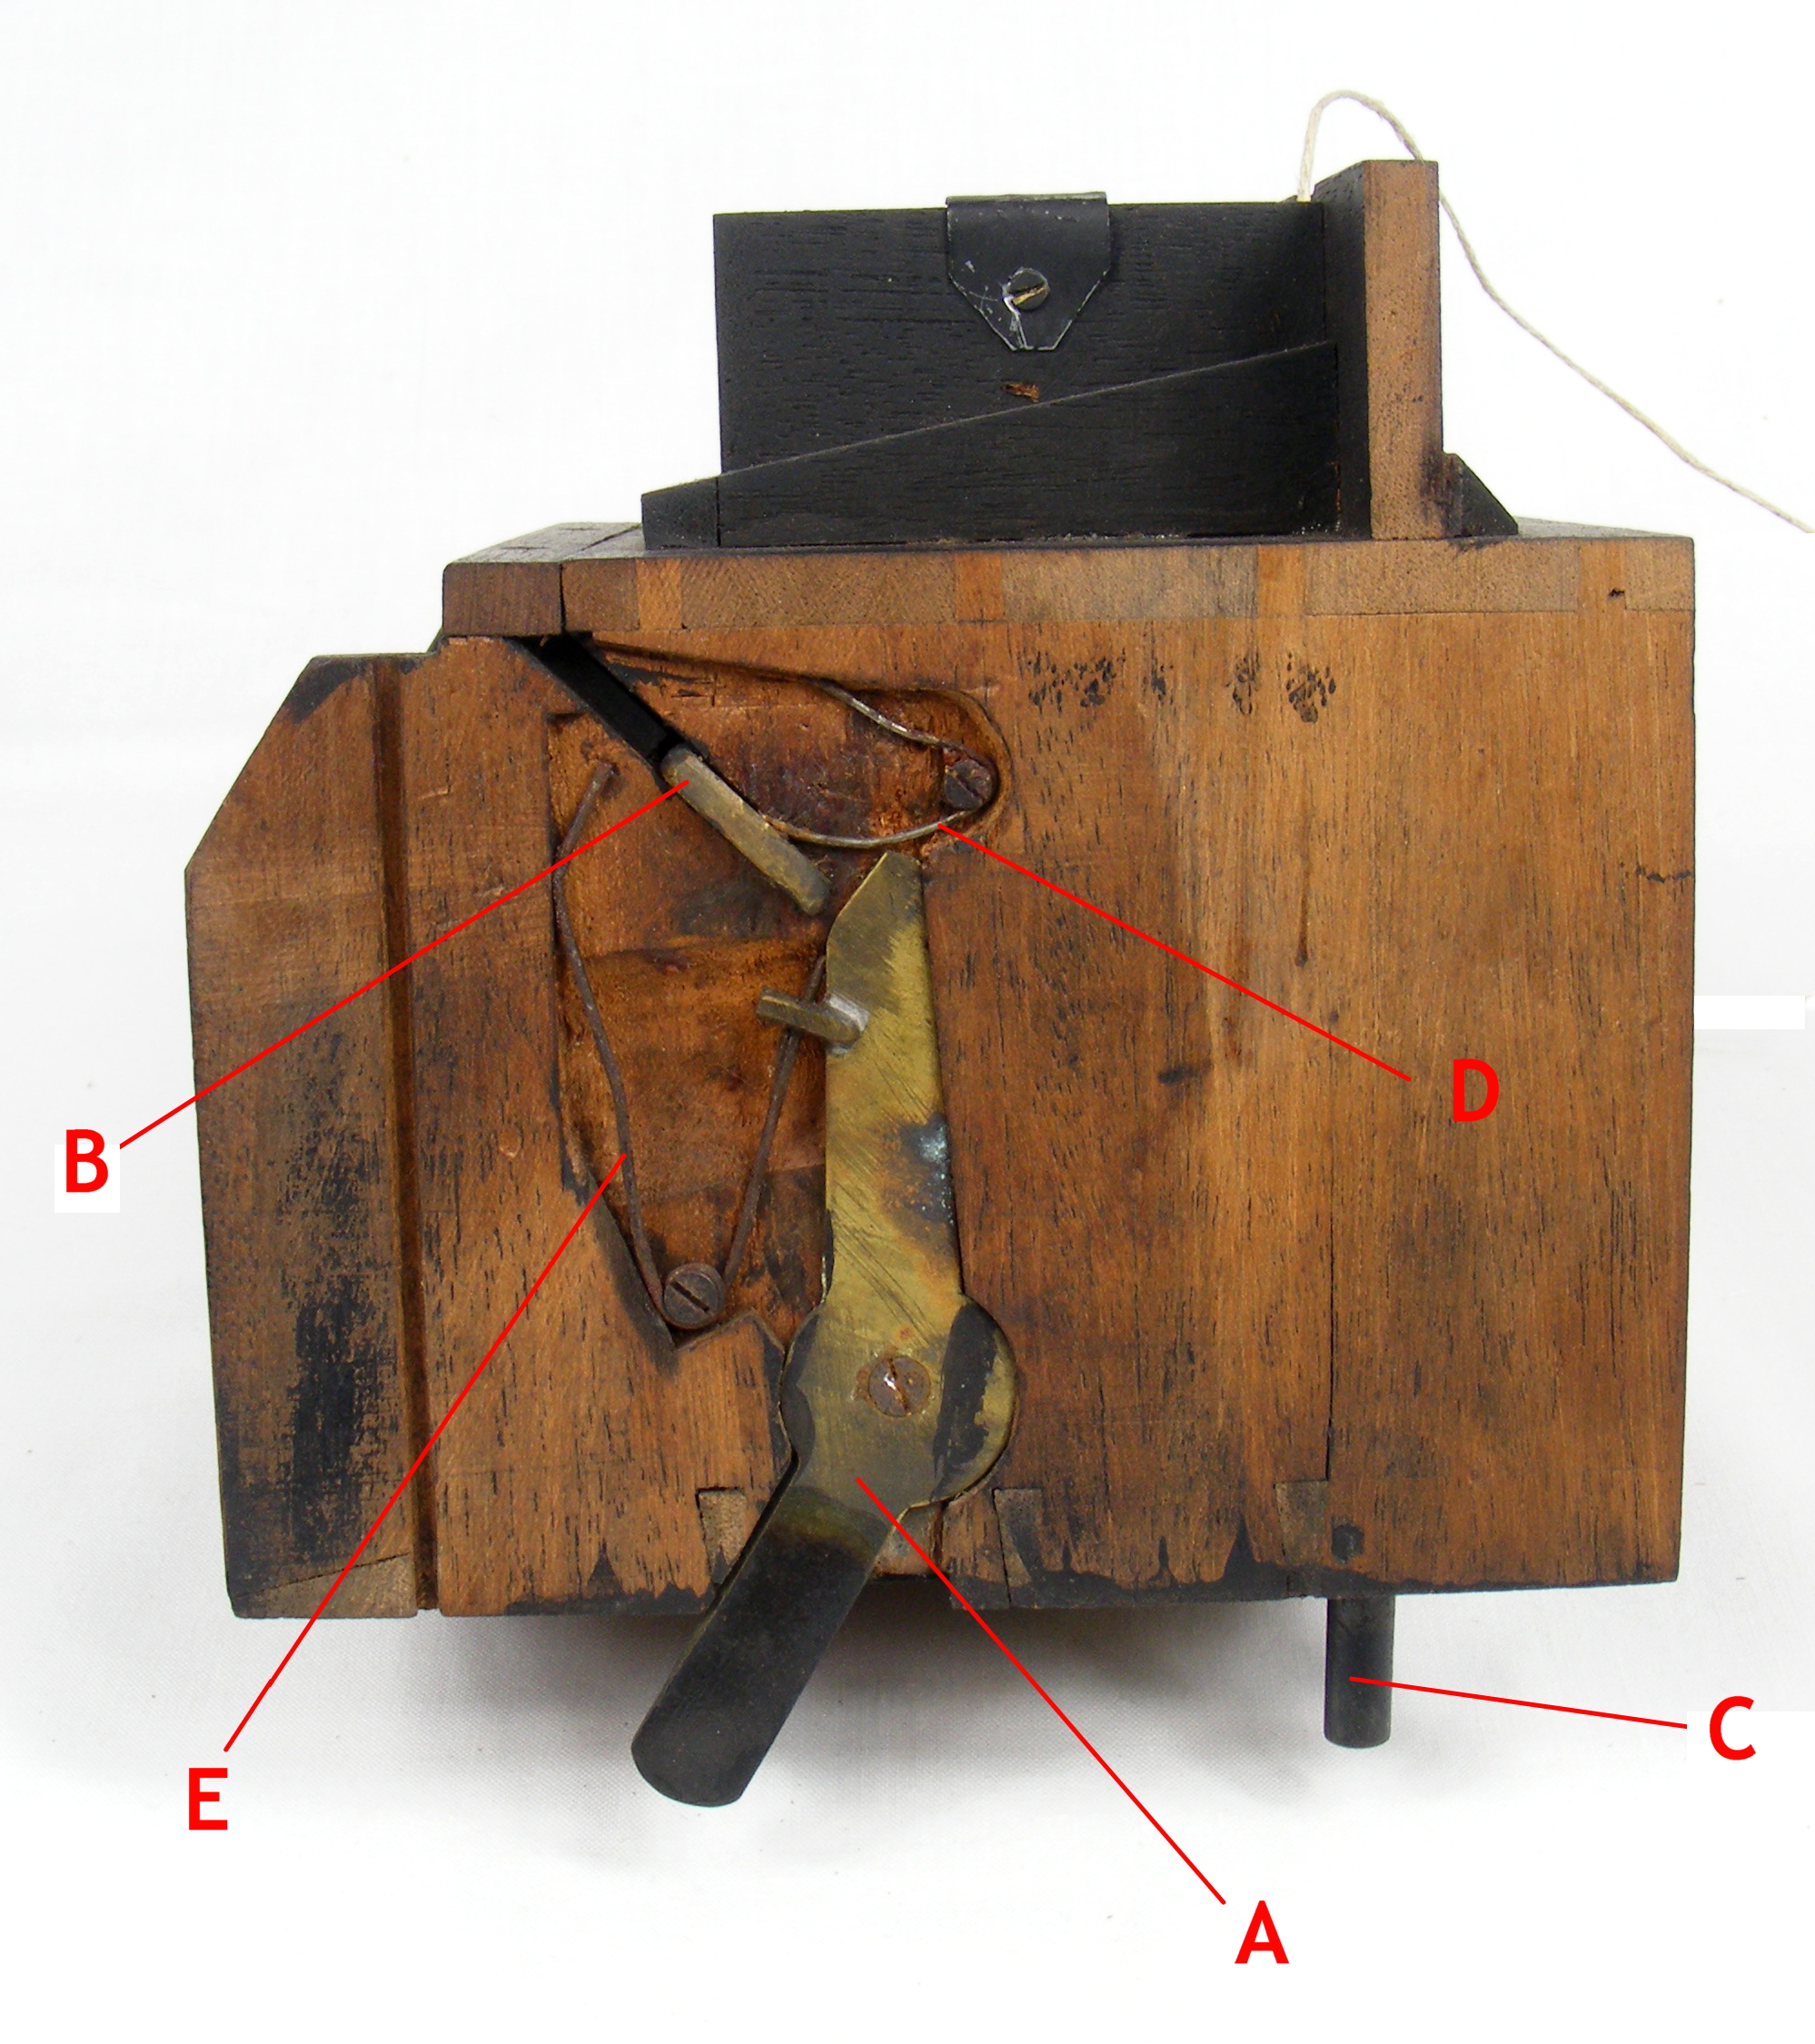 Image of Vanneck shutter assembly (annotated)